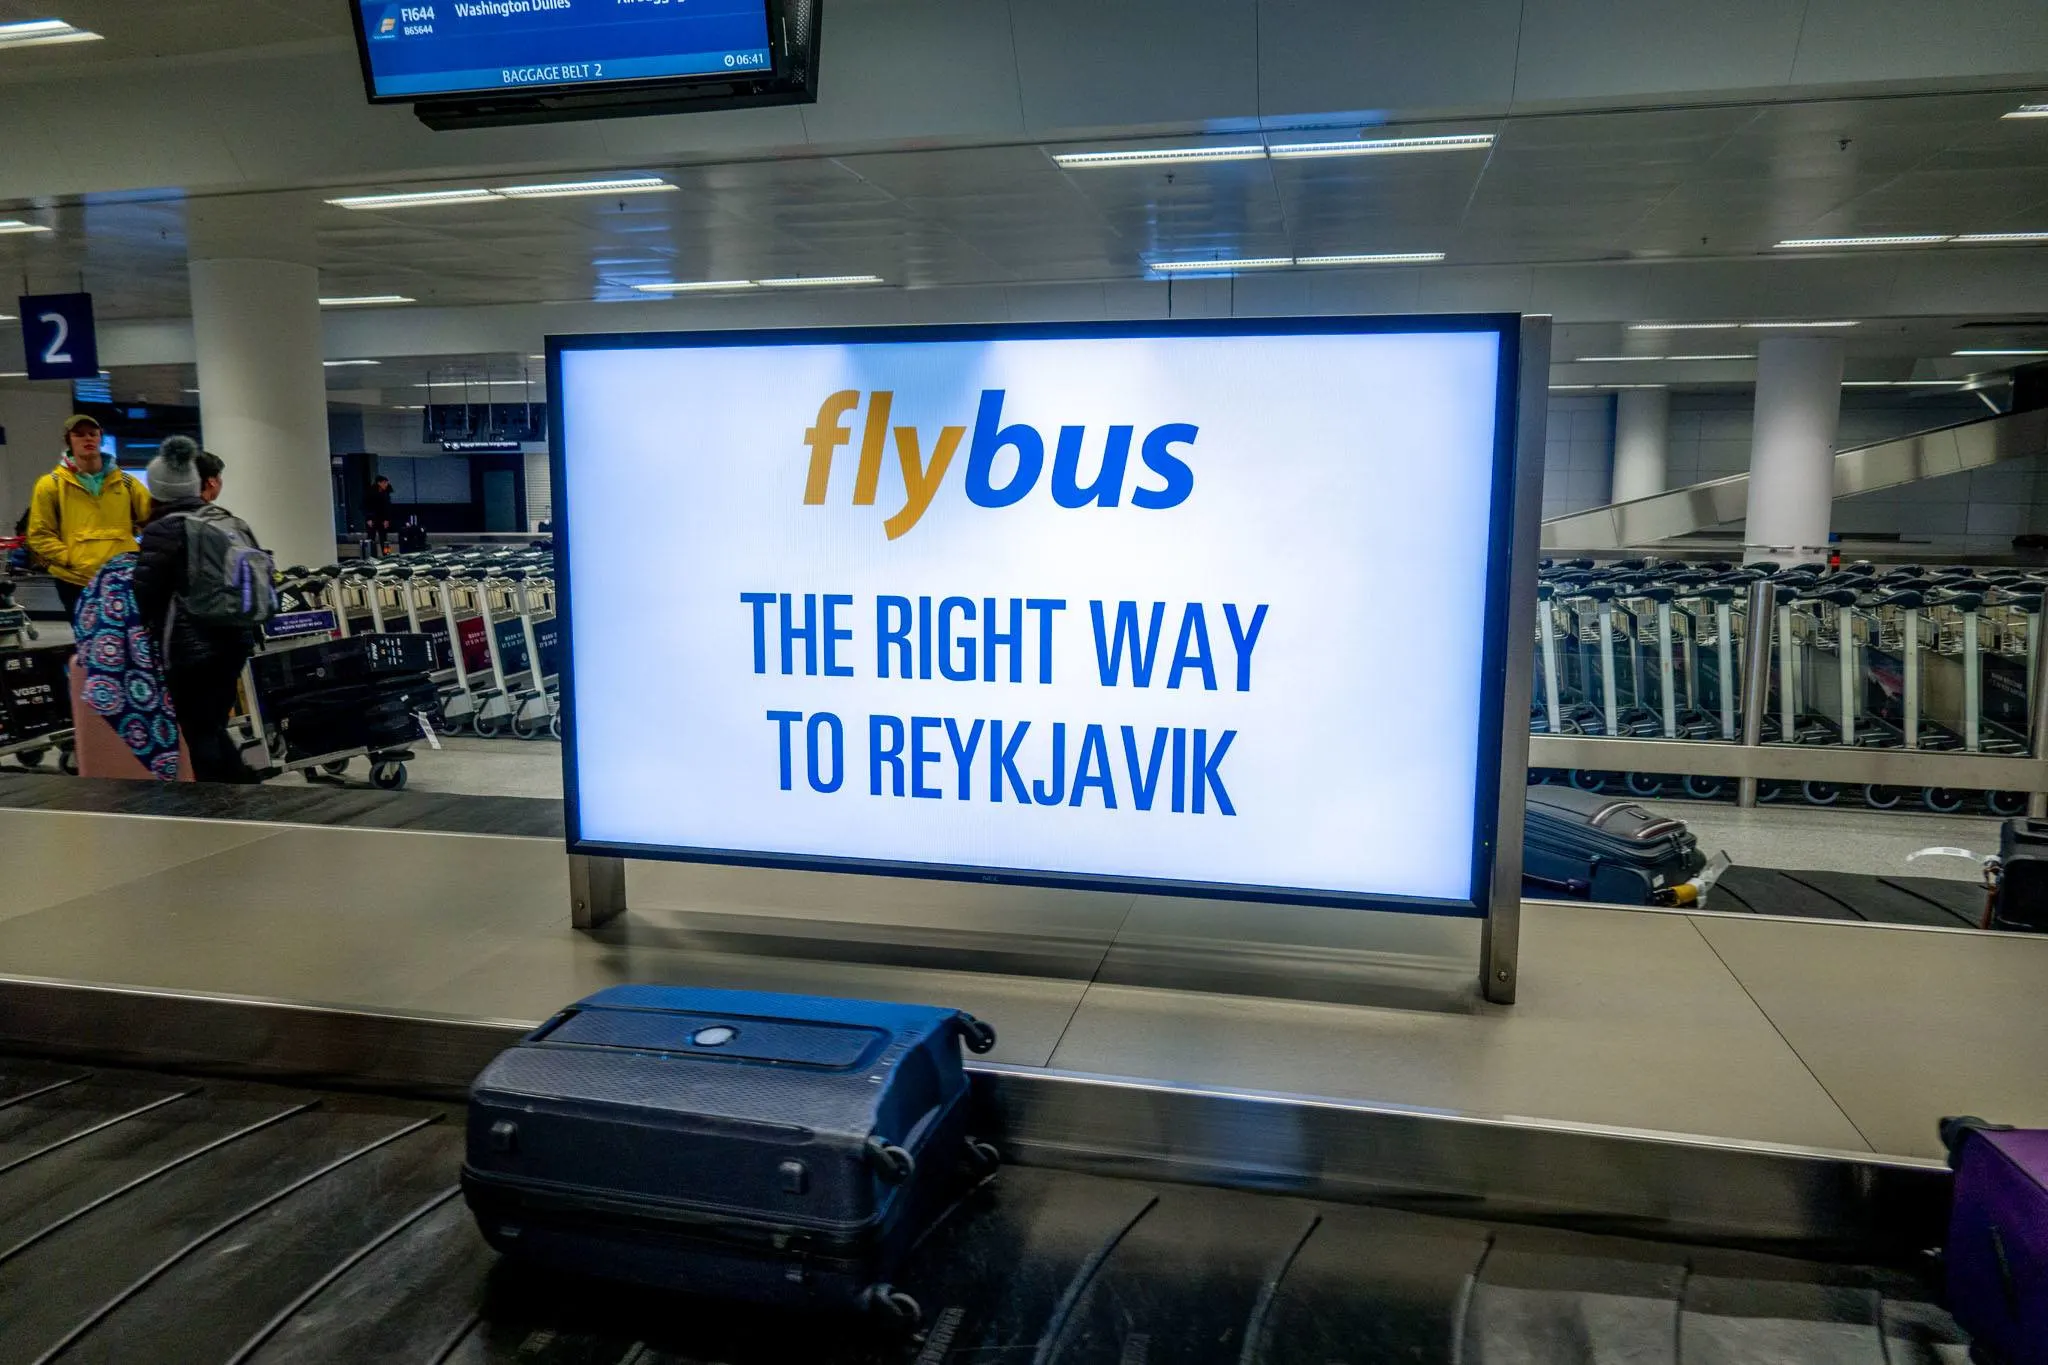 Reykjavik Excursions sign for the Flybus in the baggage claim area at Keflavik airport